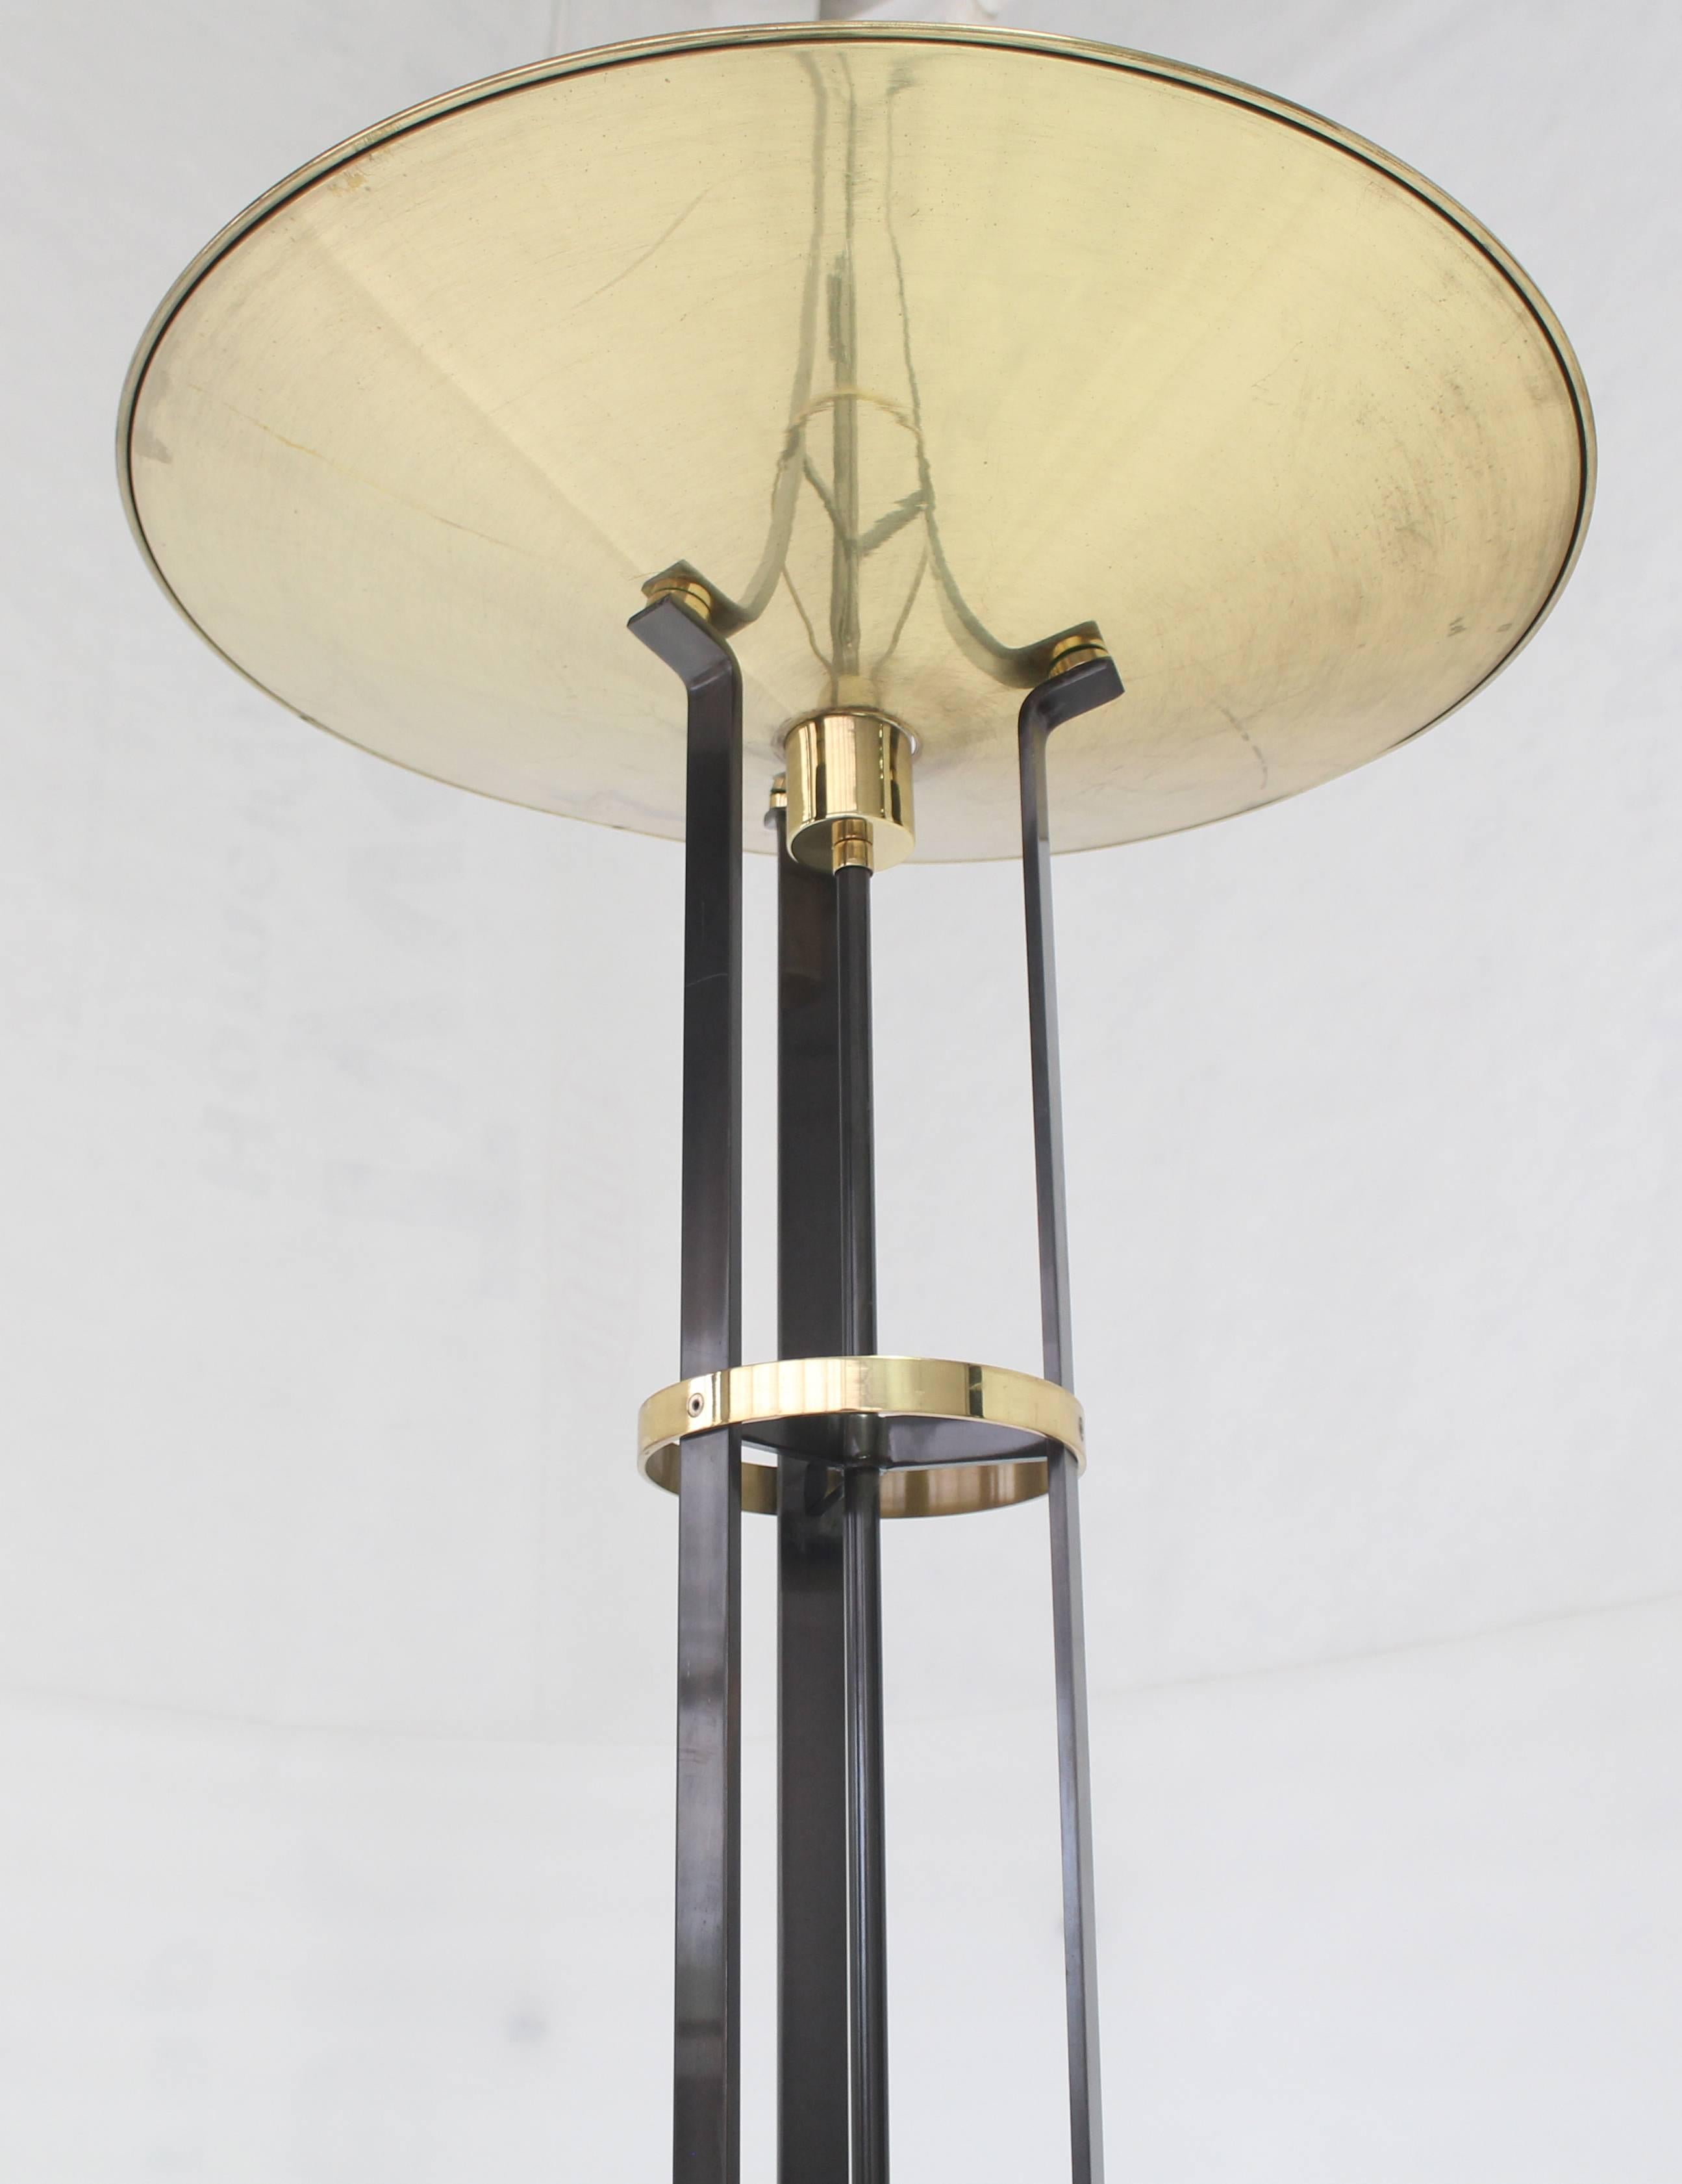 Large Italian Brass Shade Floor Lamp Torchere with Dimmer In Excellent Condition For Sale In Rockaway, NJ